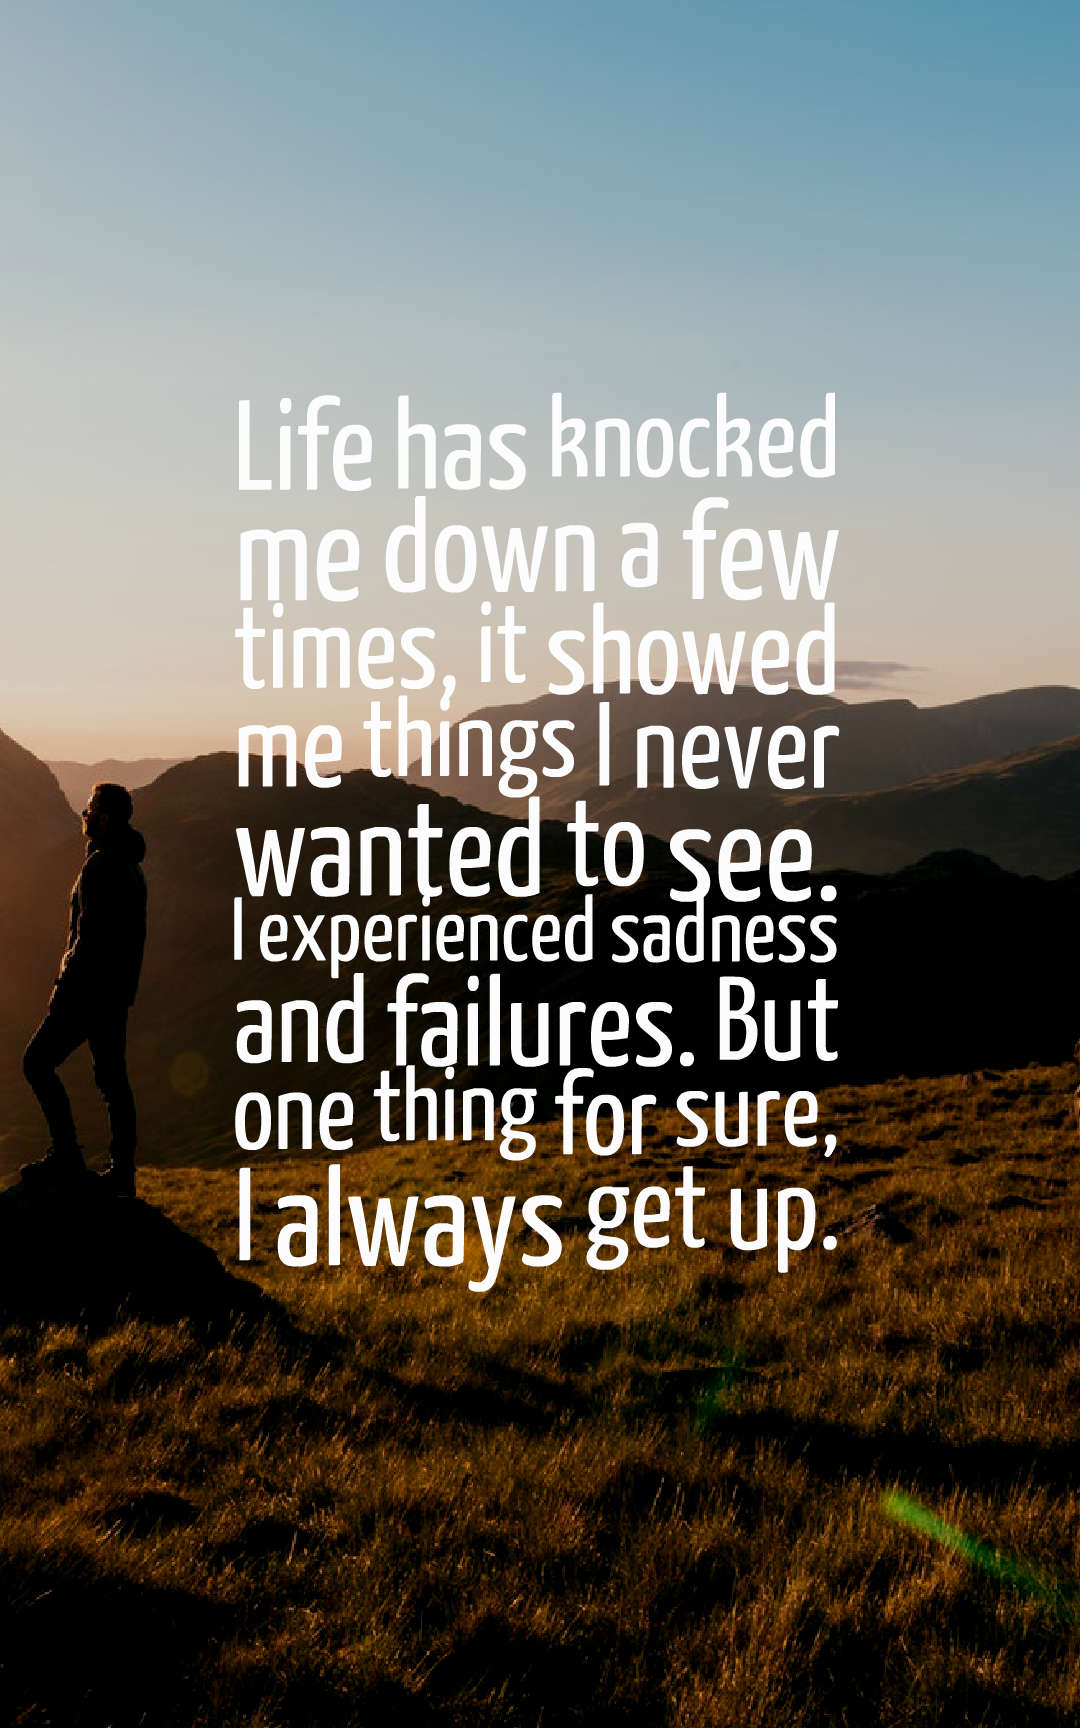 Life has knocked me down a few times, it showed me things I never wanted to see. I experienced sadness and failures. But one thing for sure, I always get up.